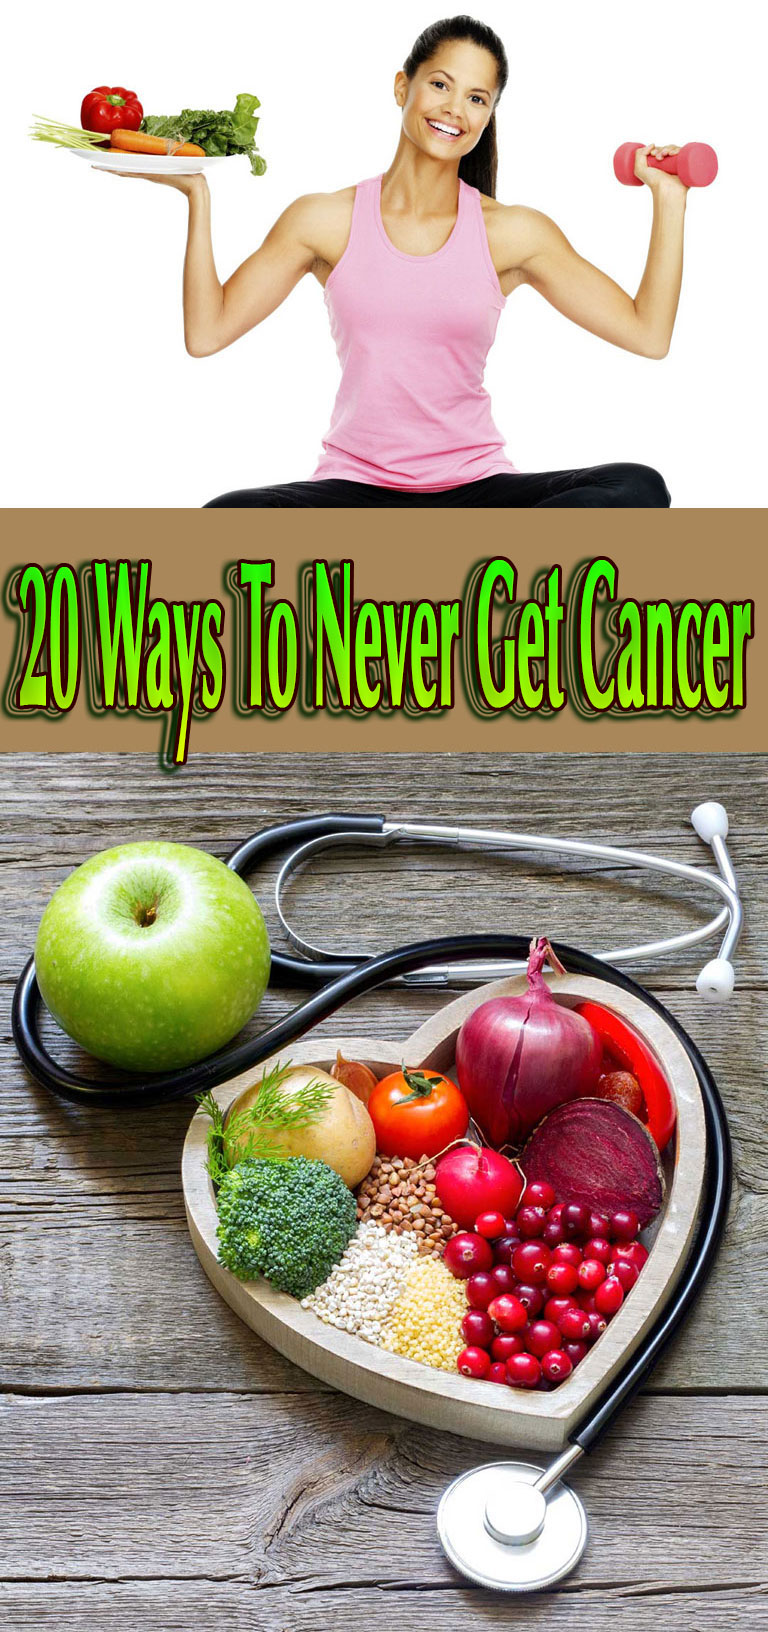 20 Ways To Never Get Cancer